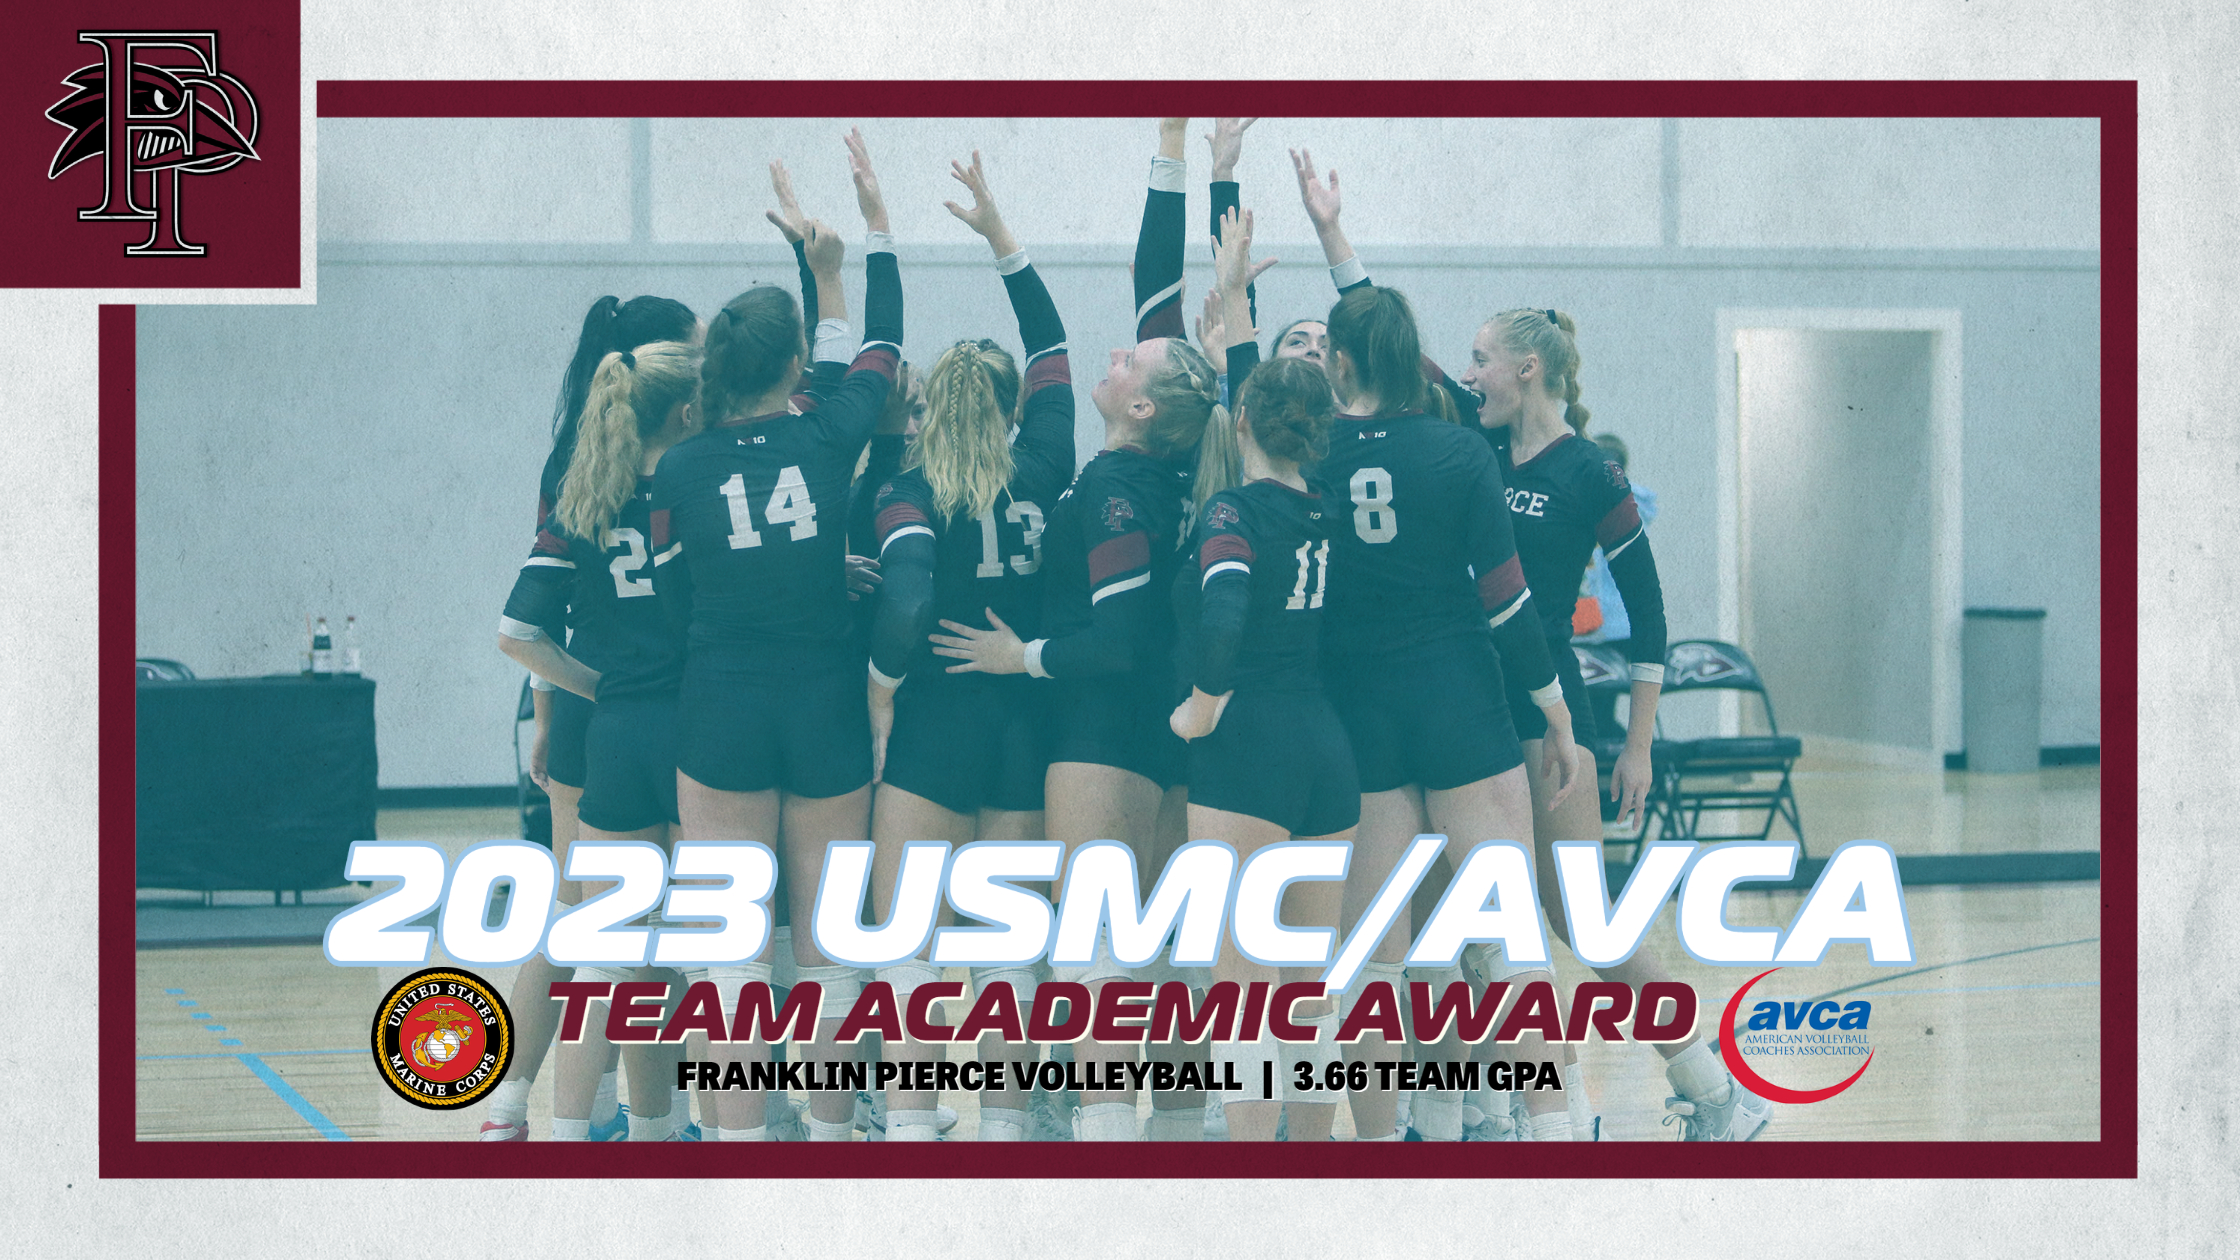 Volleyball Included In Record List of USMC/AVCA Team Academic Award Winners